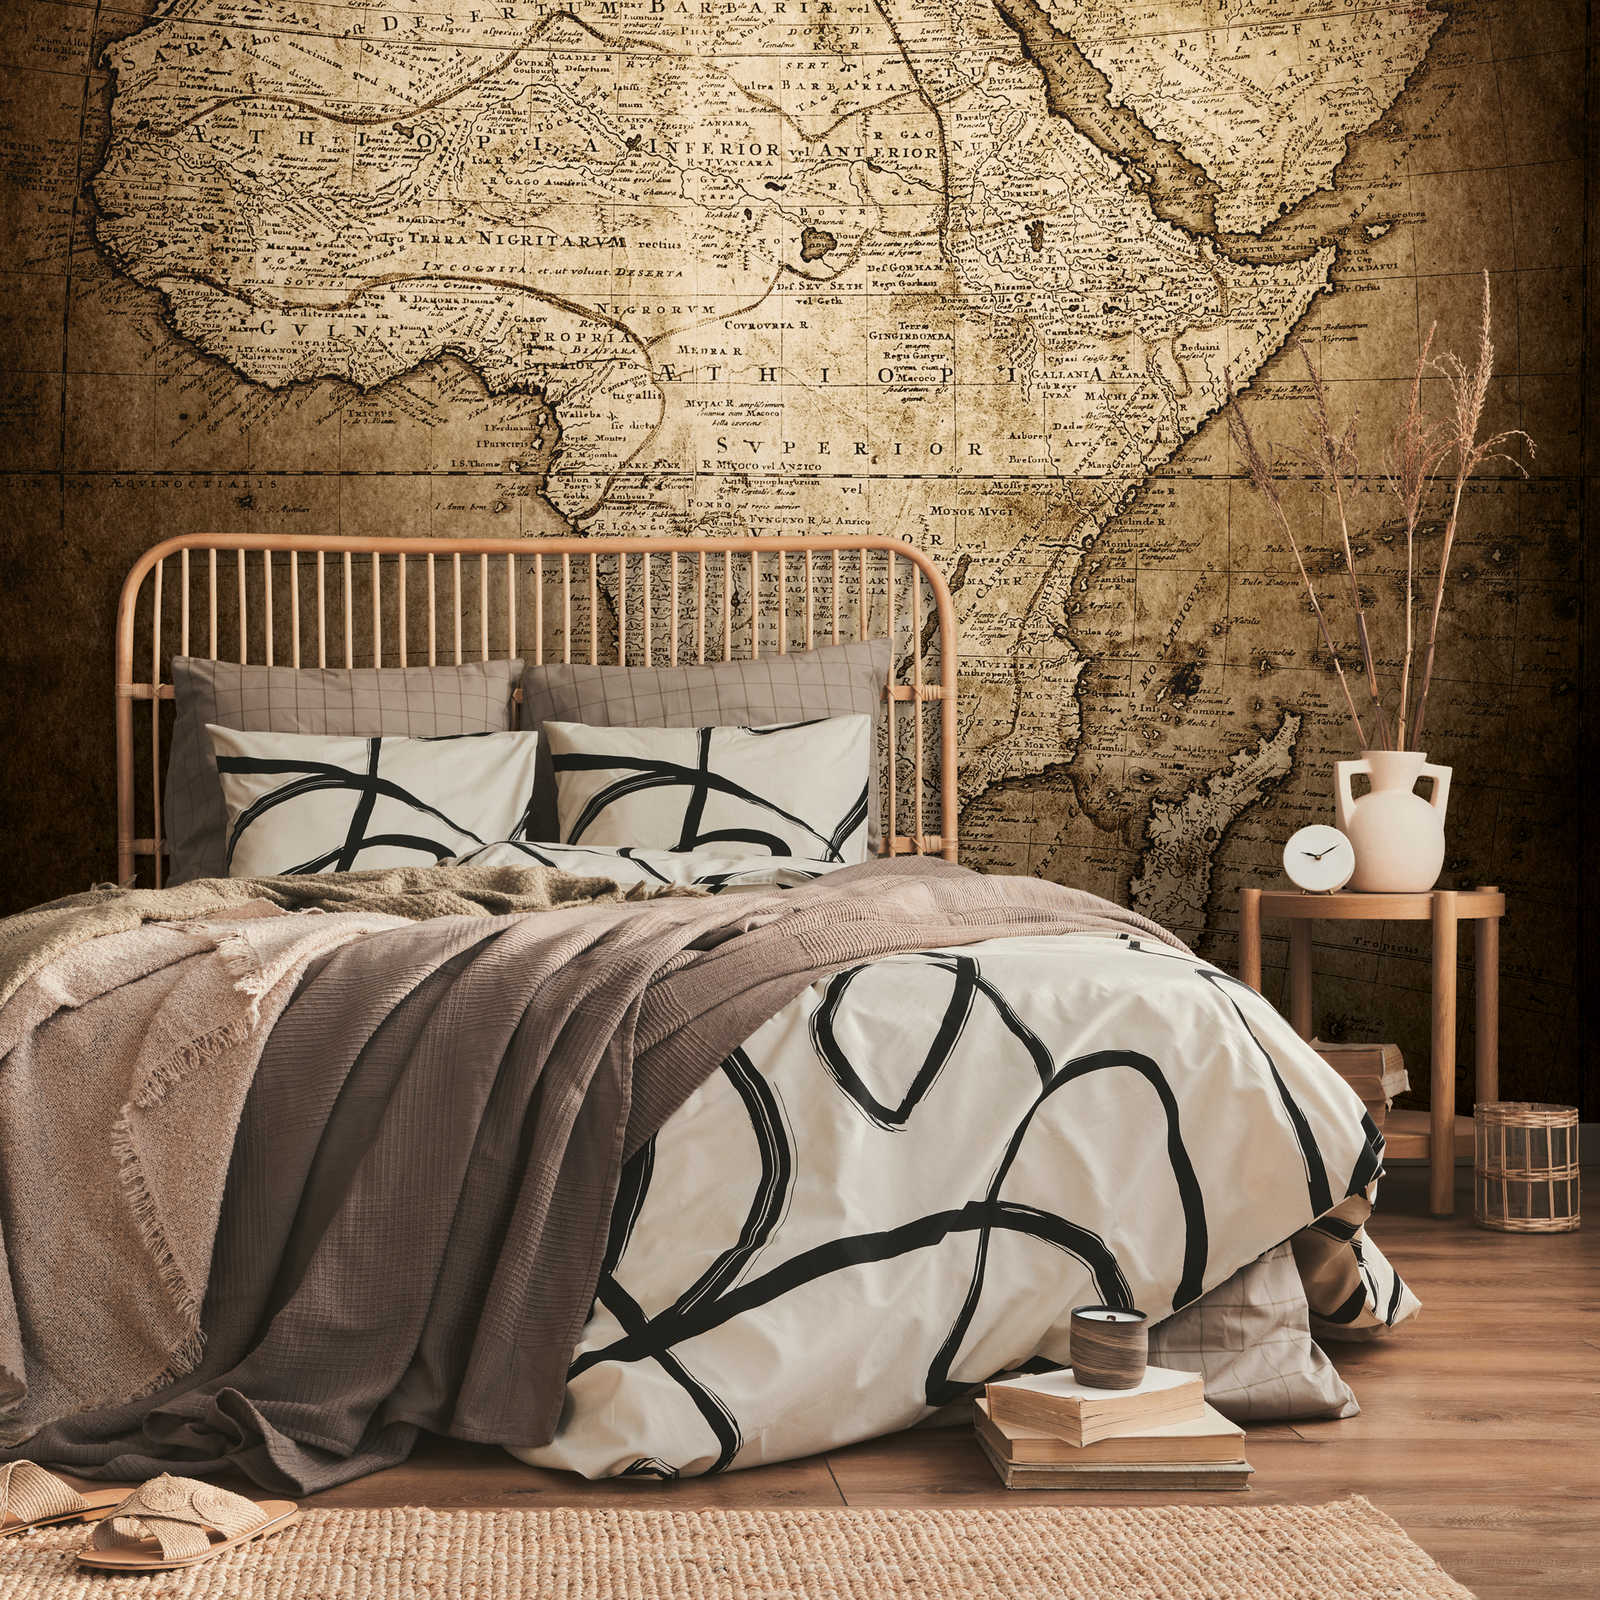 Vintage style Africa map mural
